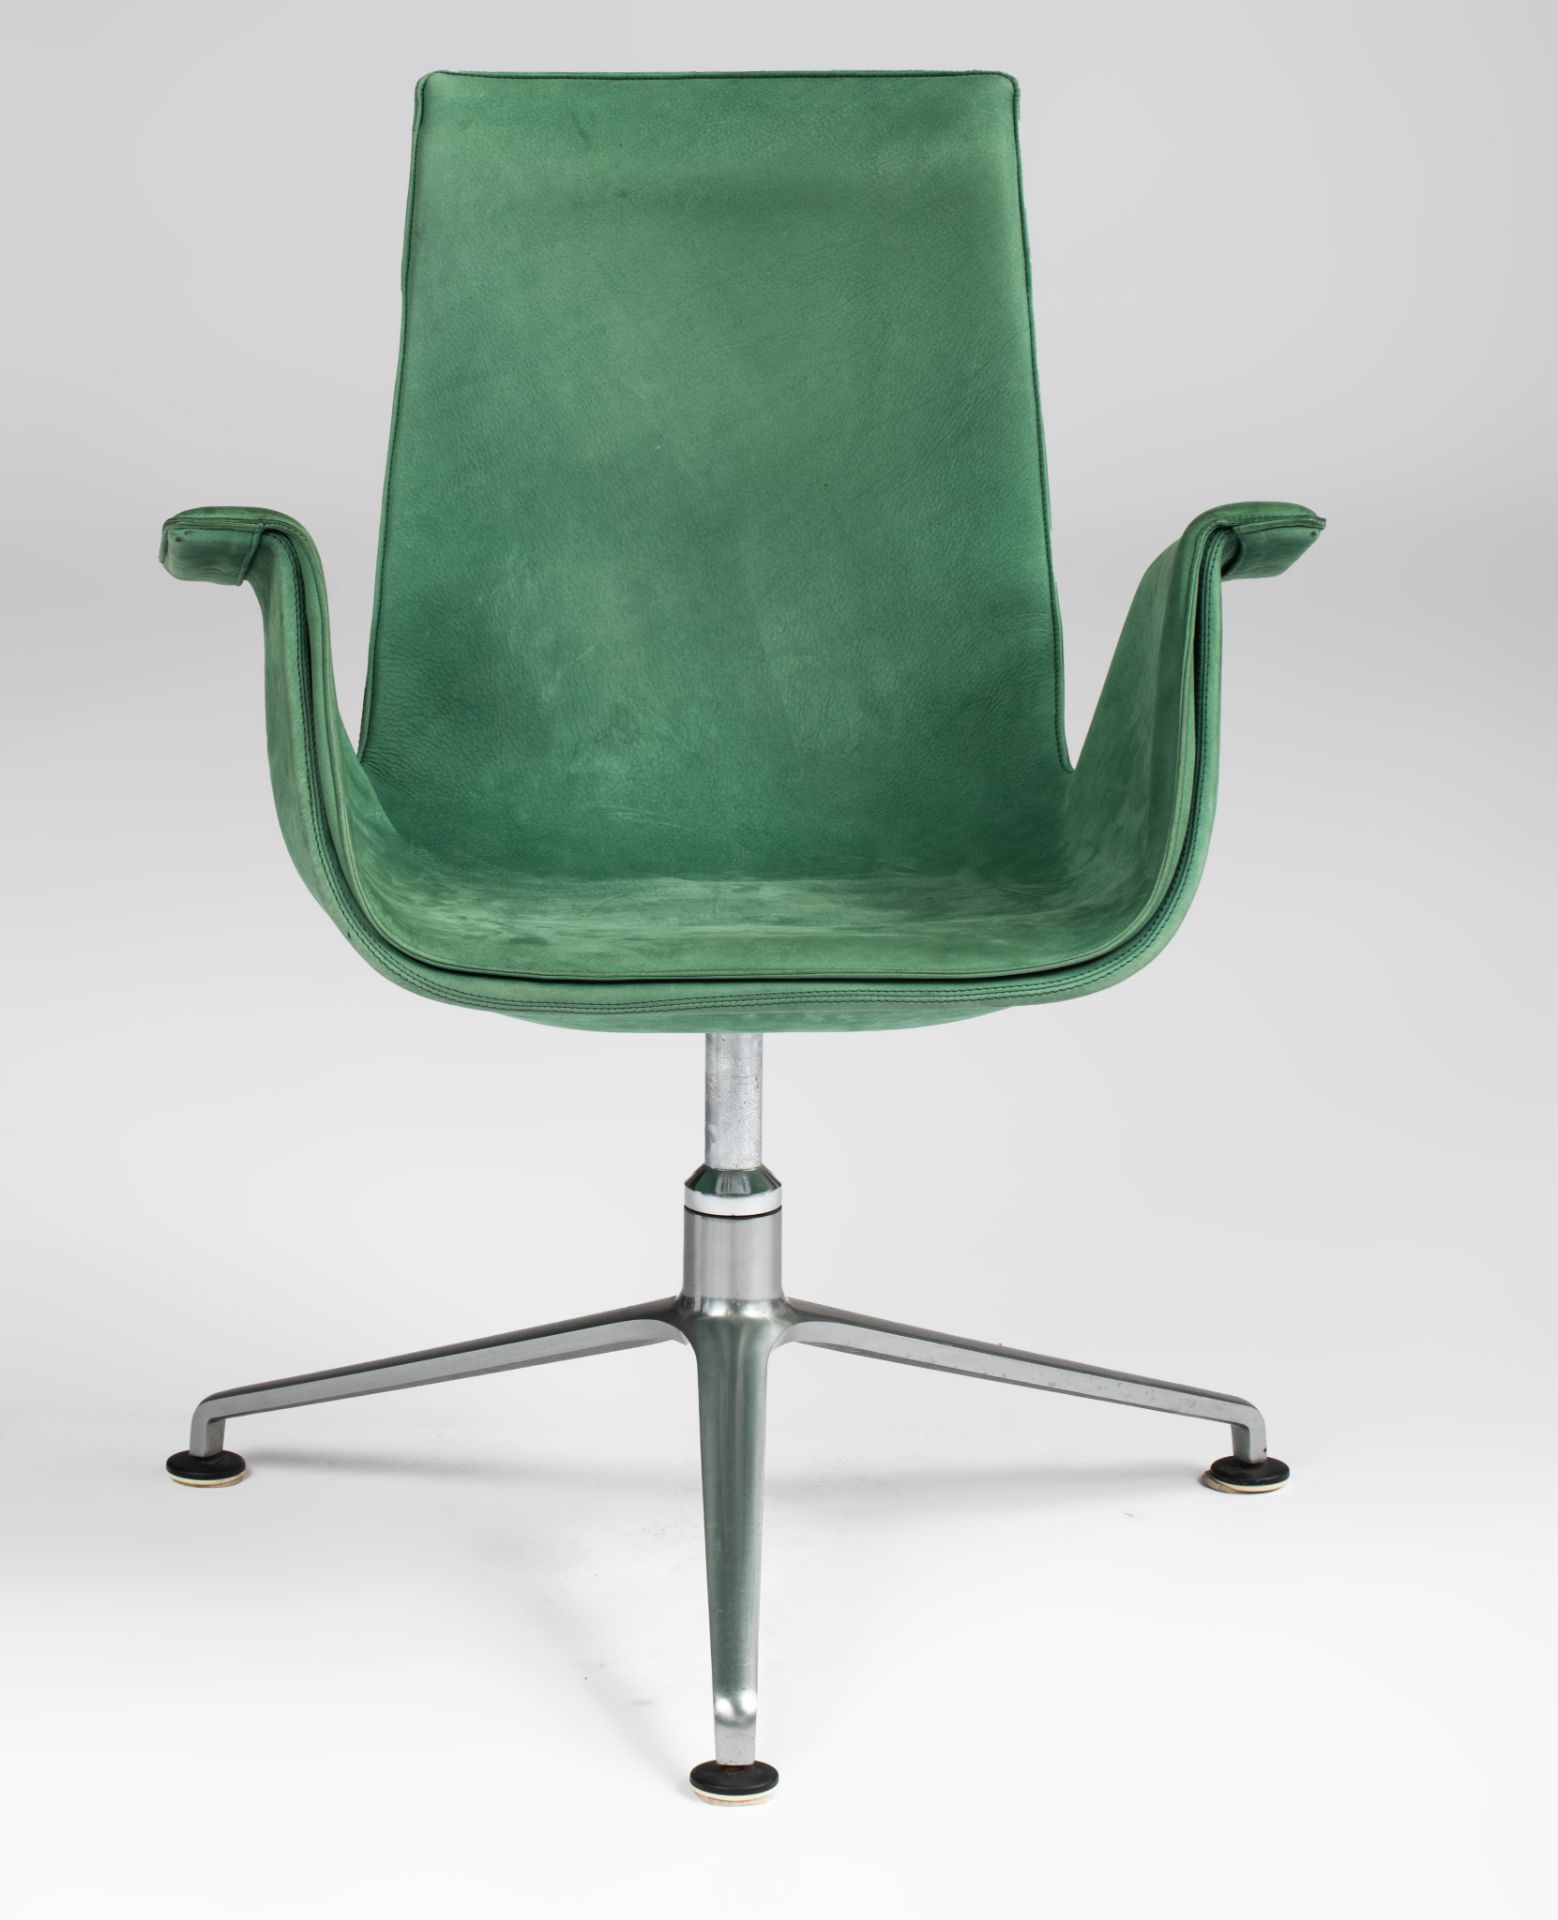 A FK 6725 Bird Chair, design by Preben Fabricius and Jorgen Kastholm for Alfred Kill International, - Image 3 of 9